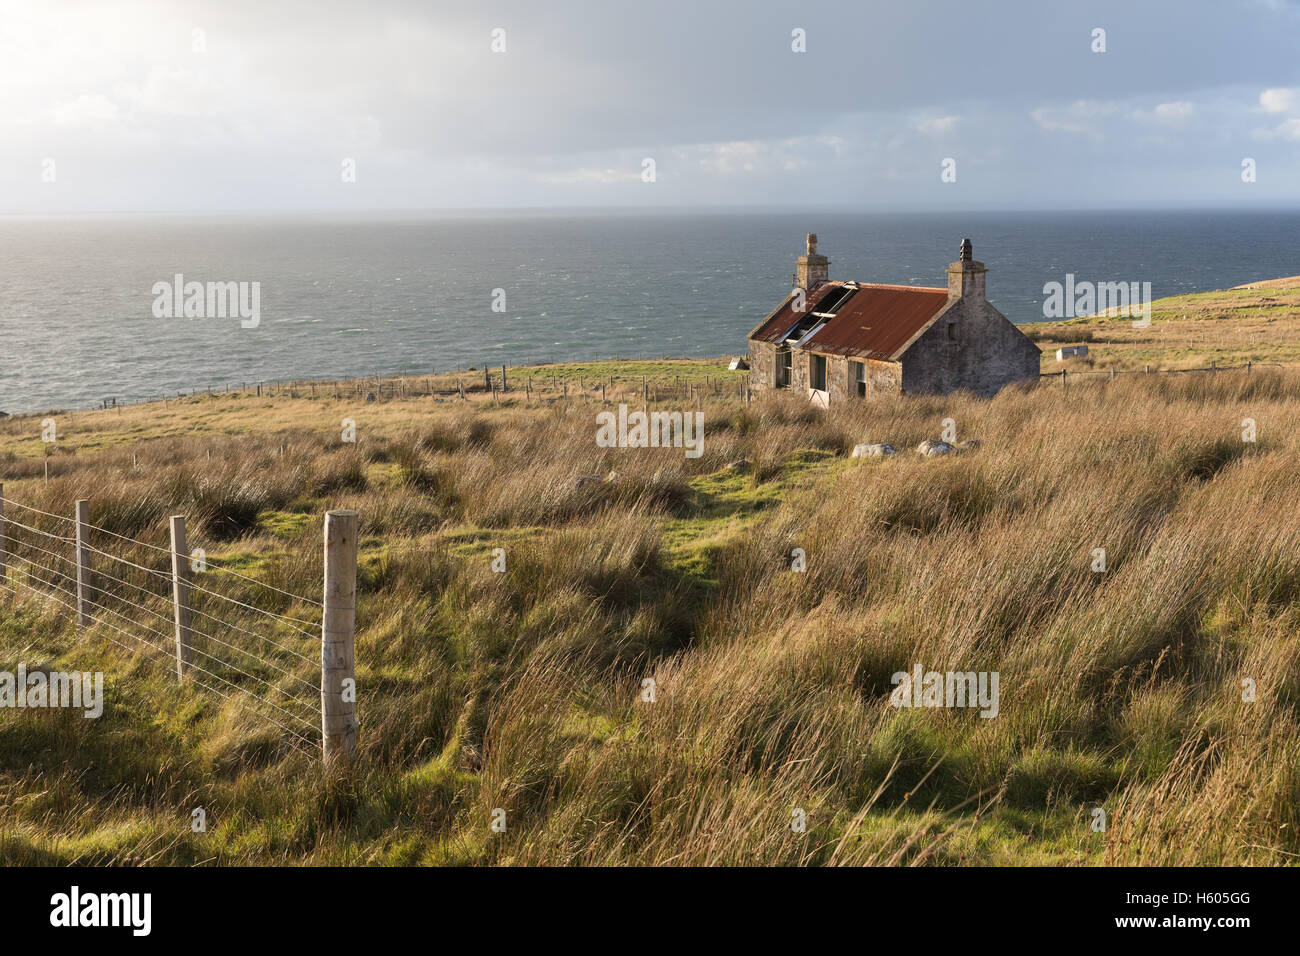 An abandoned croft house at Melvaig, a remote village on the coast of Wester Ross, Scottish Highlands. Stock Photo